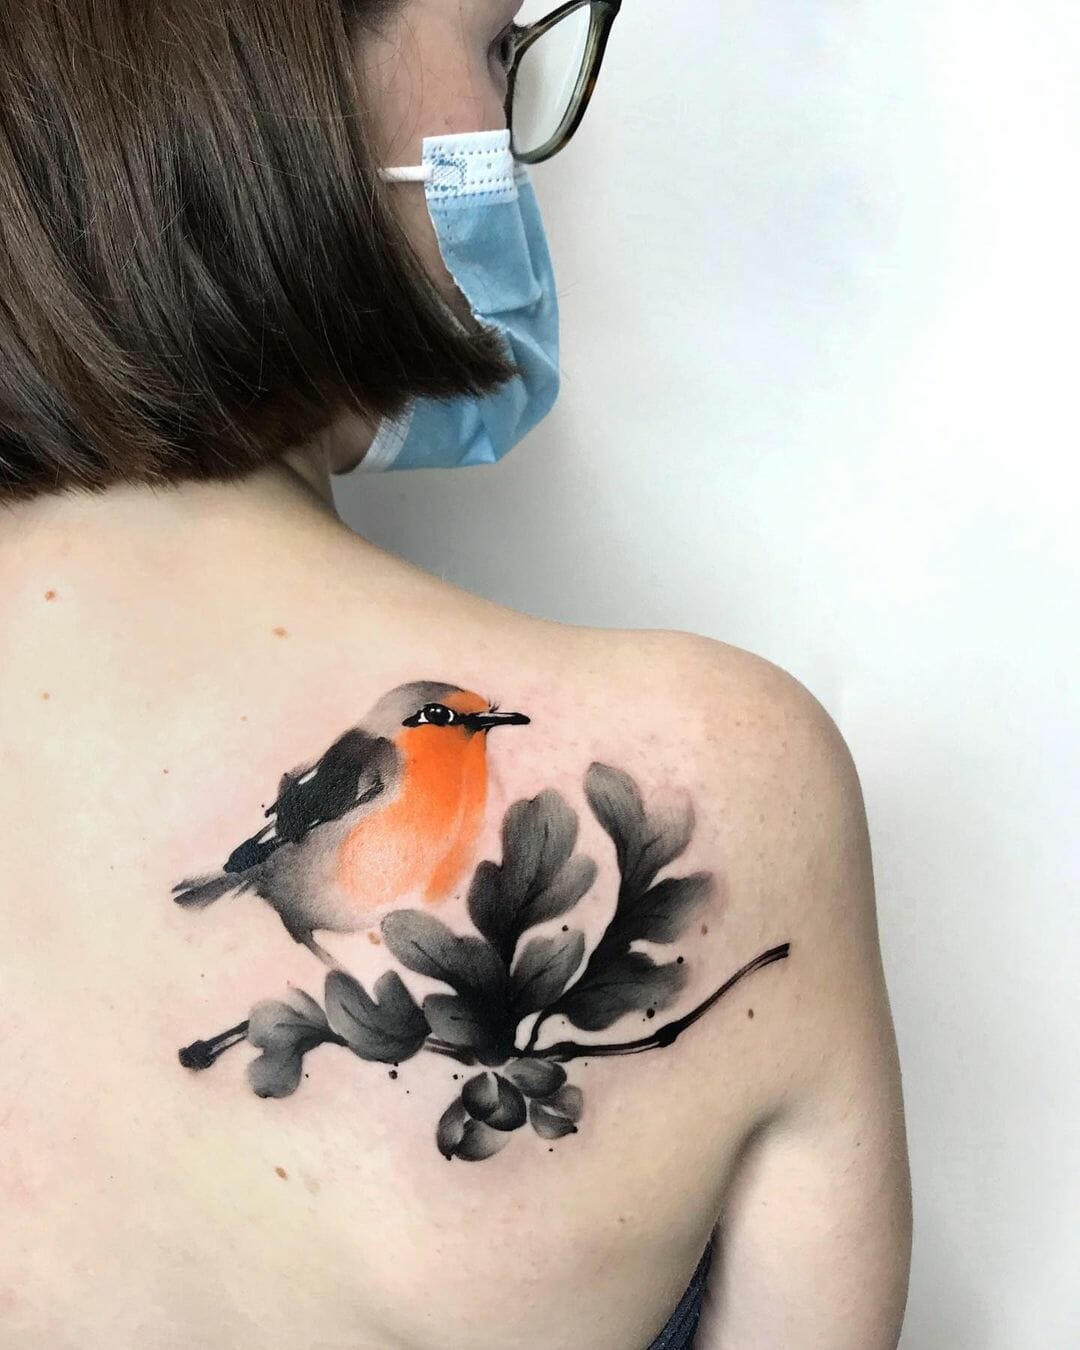 Incredible These birds have young woman tattoos  Stuck in DC